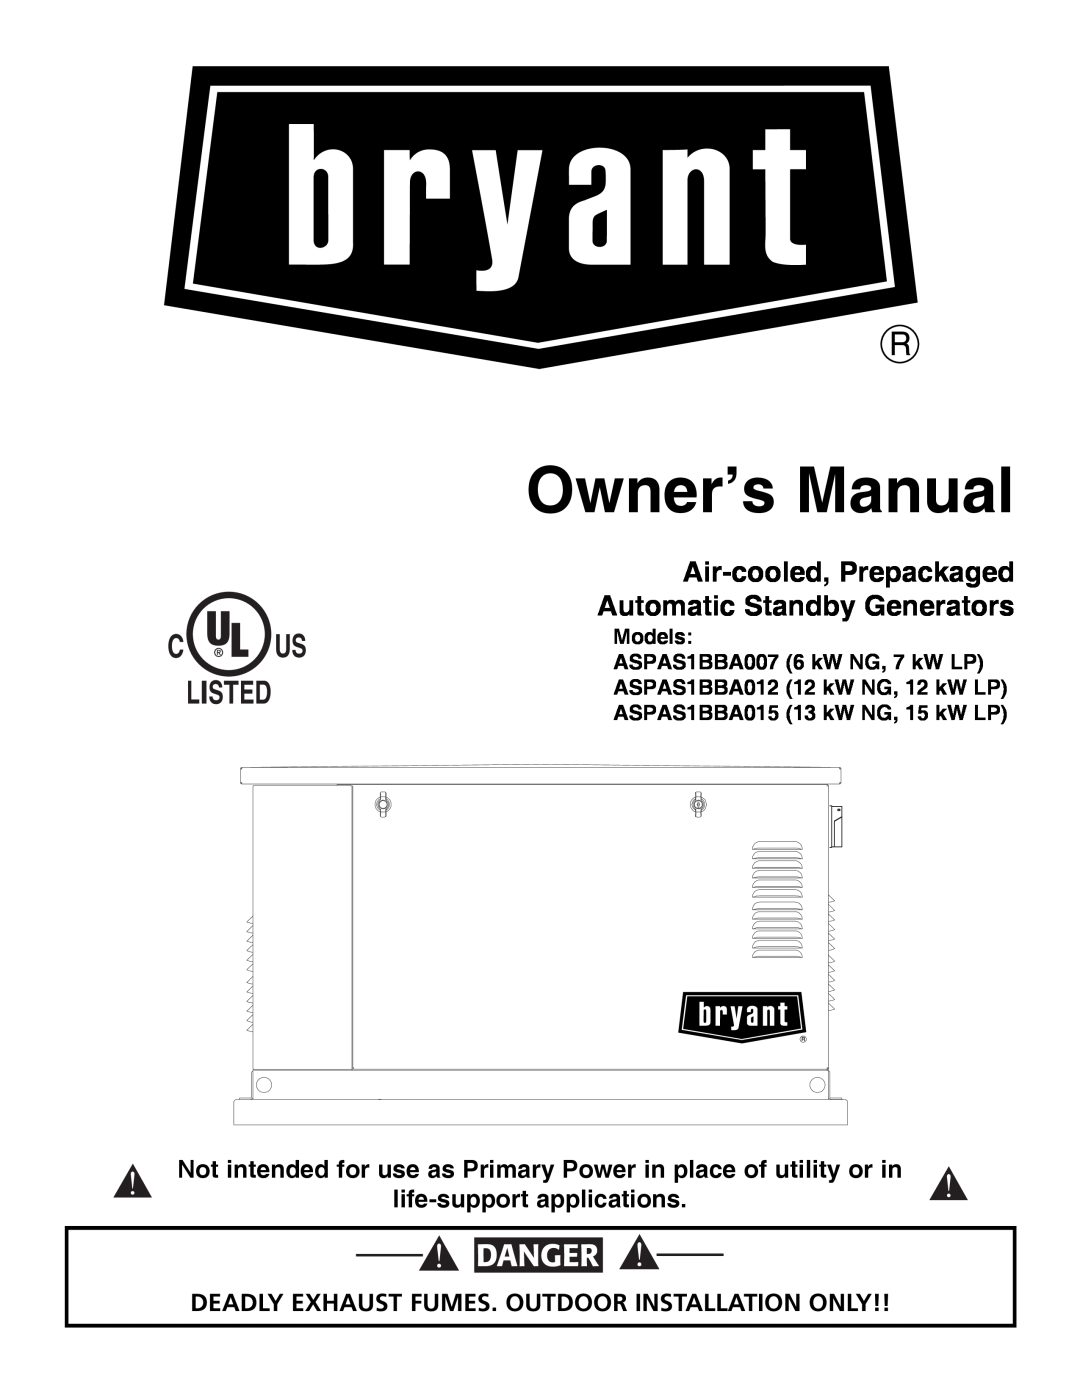 Bryant ASPAS1BBA015 owner manual Owner’s Manual, Cus Listed, Danger, Deadly Exhaust Fumes. Outdoor Installation Only 